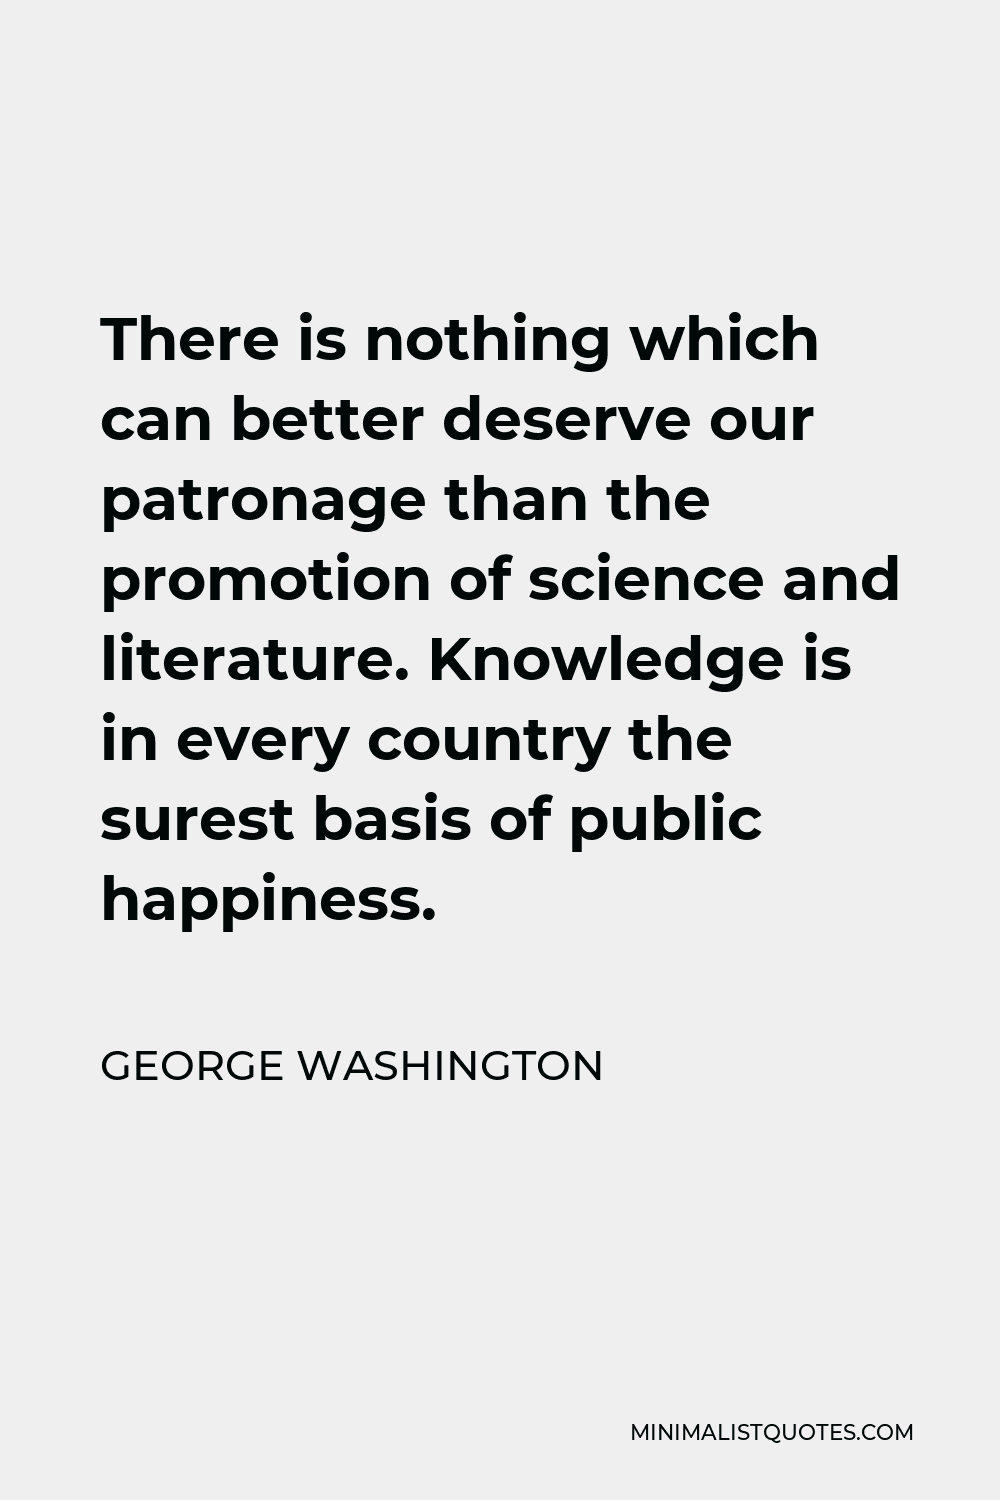 George Washington Quote - There is nothing which can better deserve our patronage than the promotion of science and literature. Knowledge is in every country the surest basis of public happiness.